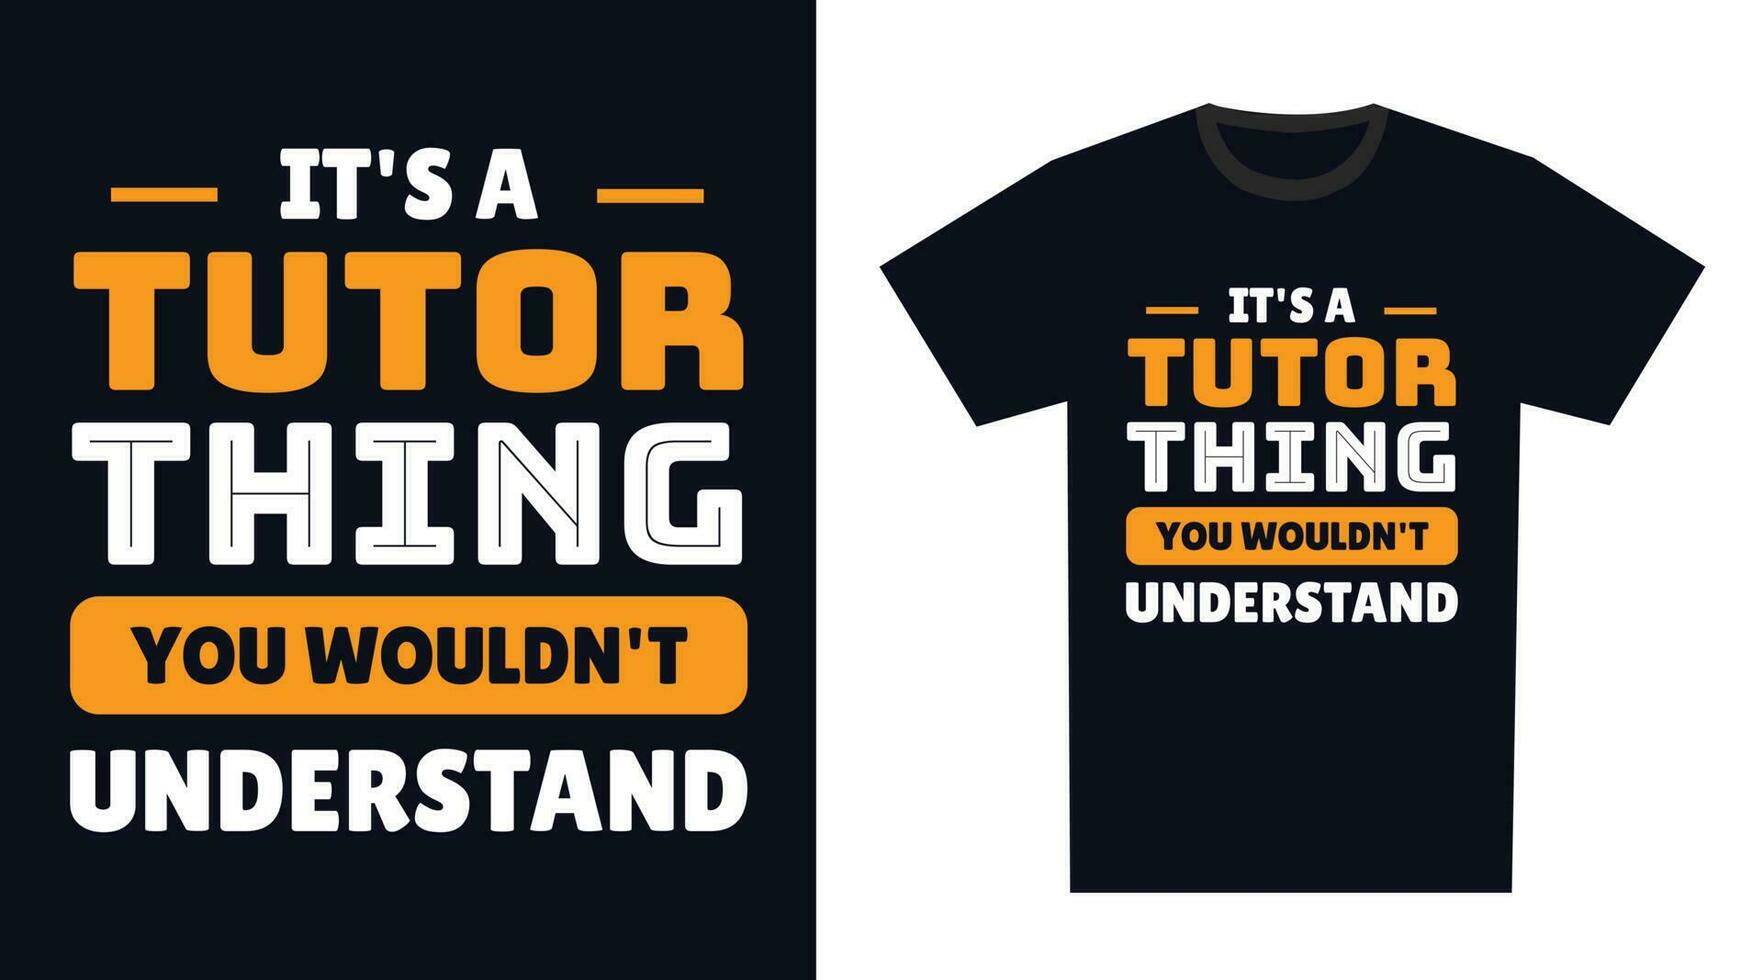 Tutor T Shirt Design. It's a Tutor Thing, You Wouldn't Understand vector